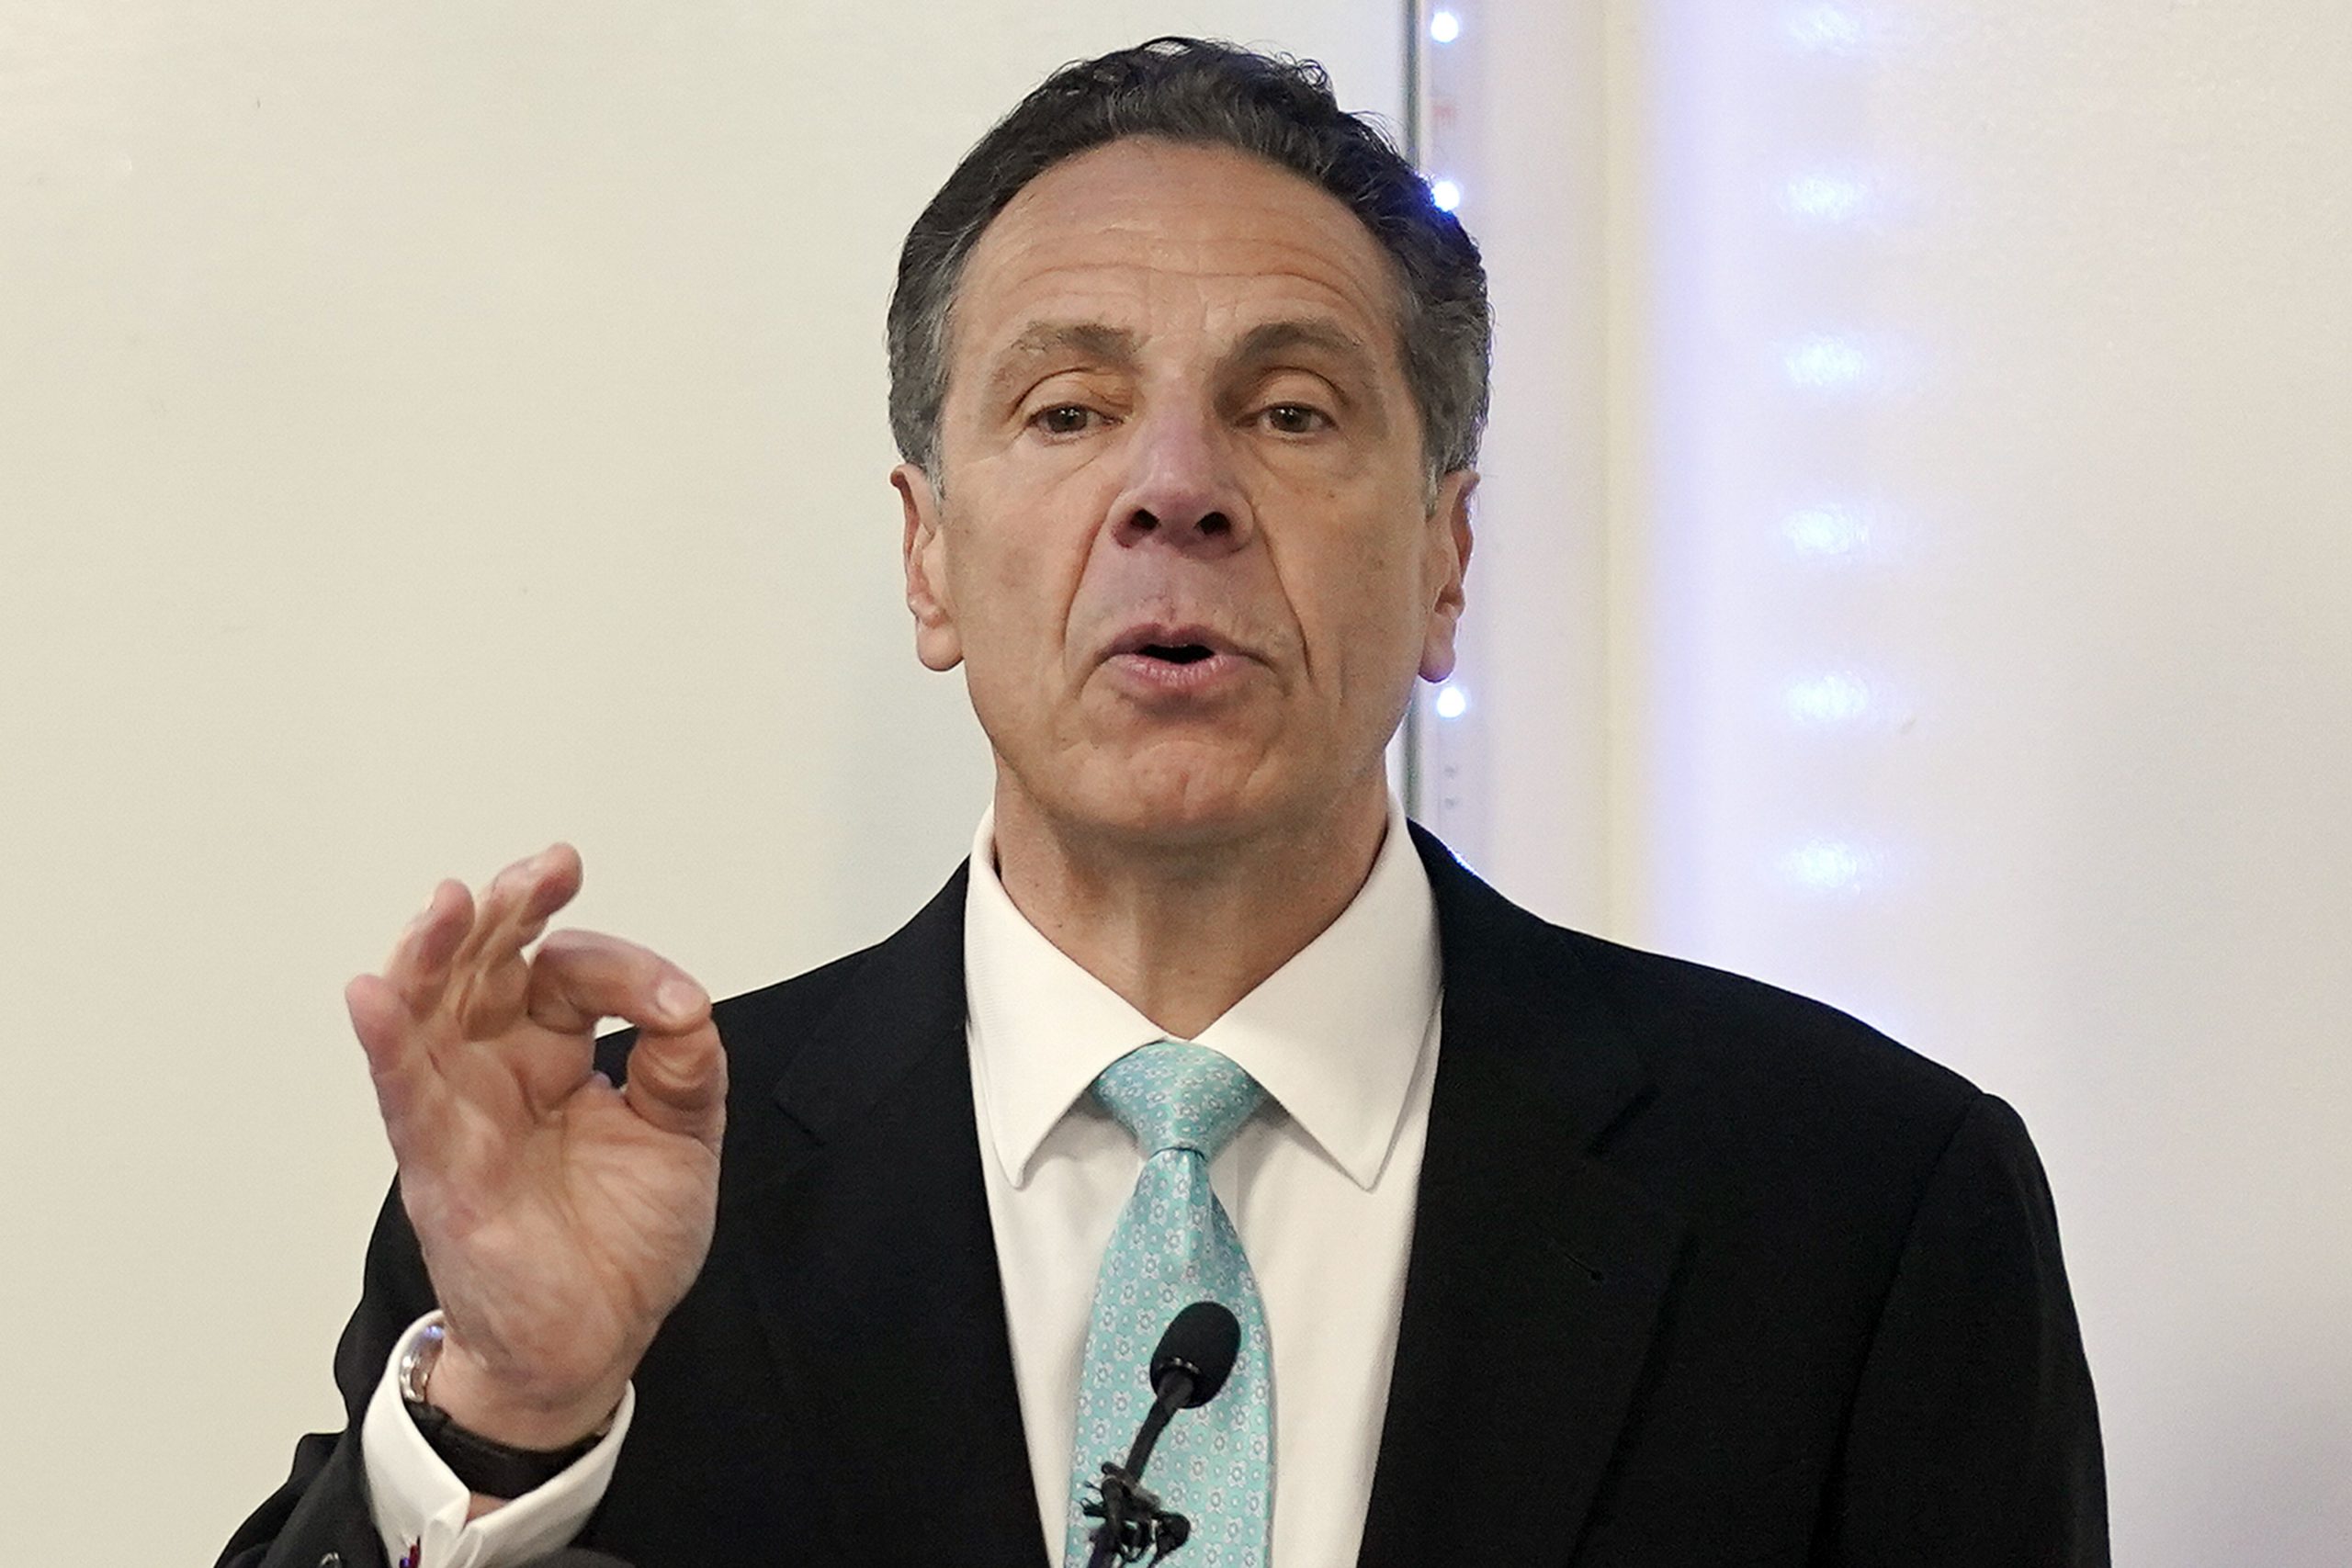 Former New York Gov. Andrew Cuomo speaks during a New York Hispanic Clergy Organization meeting on March 17, 2022, in New York.